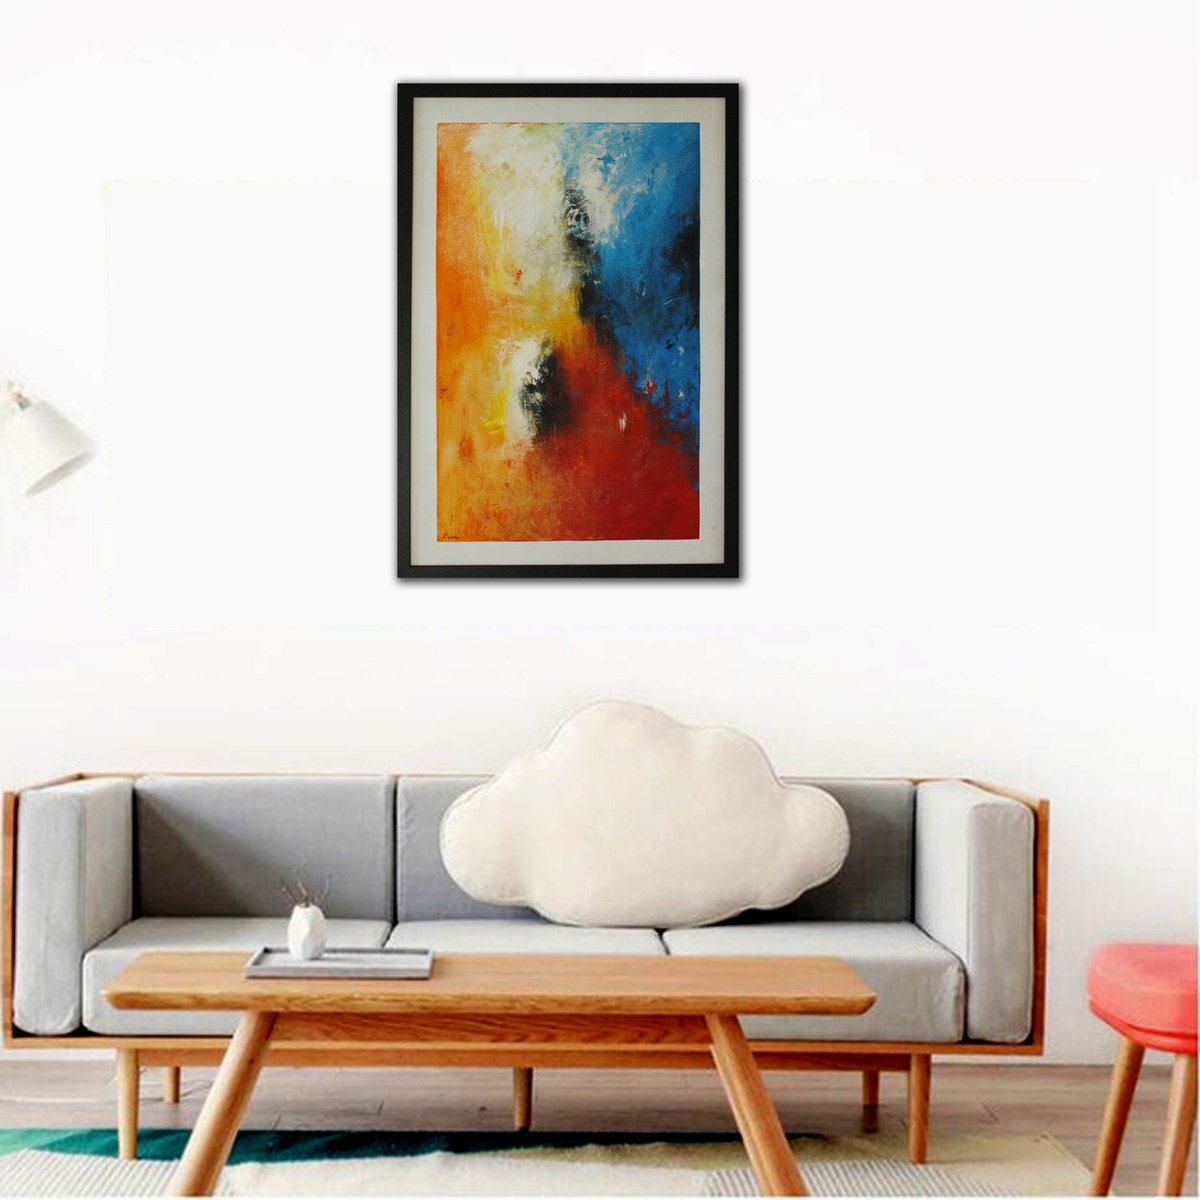 Color Composition 033. Original Abstract Painting. by Rumen Spasov